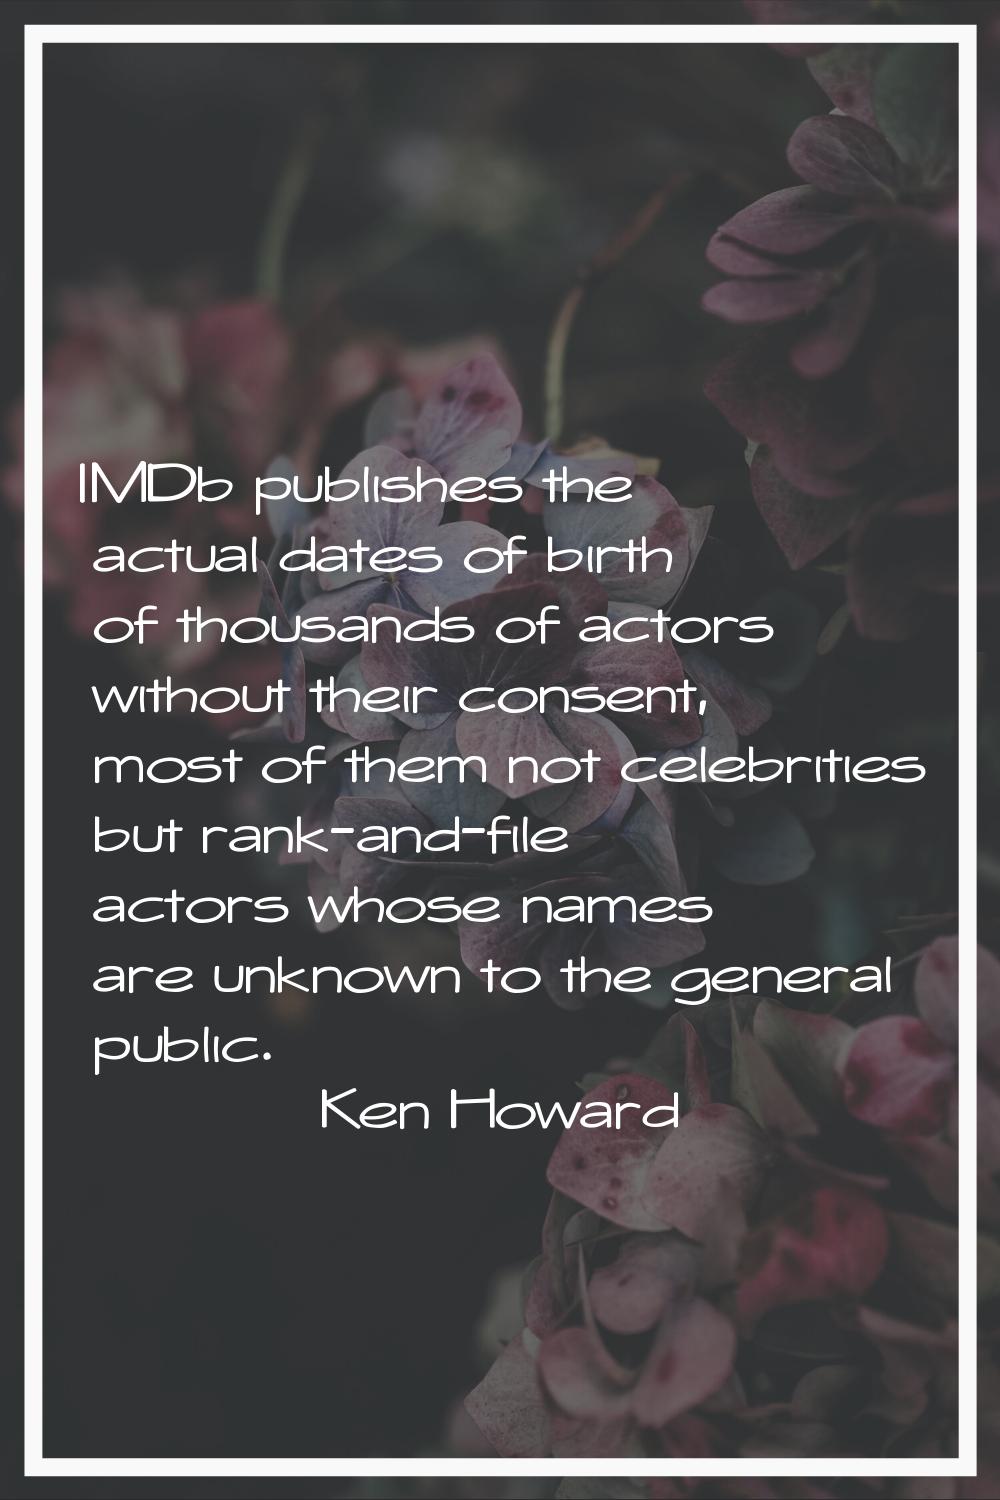 IMDb publishes the actual dates of birth of thousands of actors without their consent, most of them